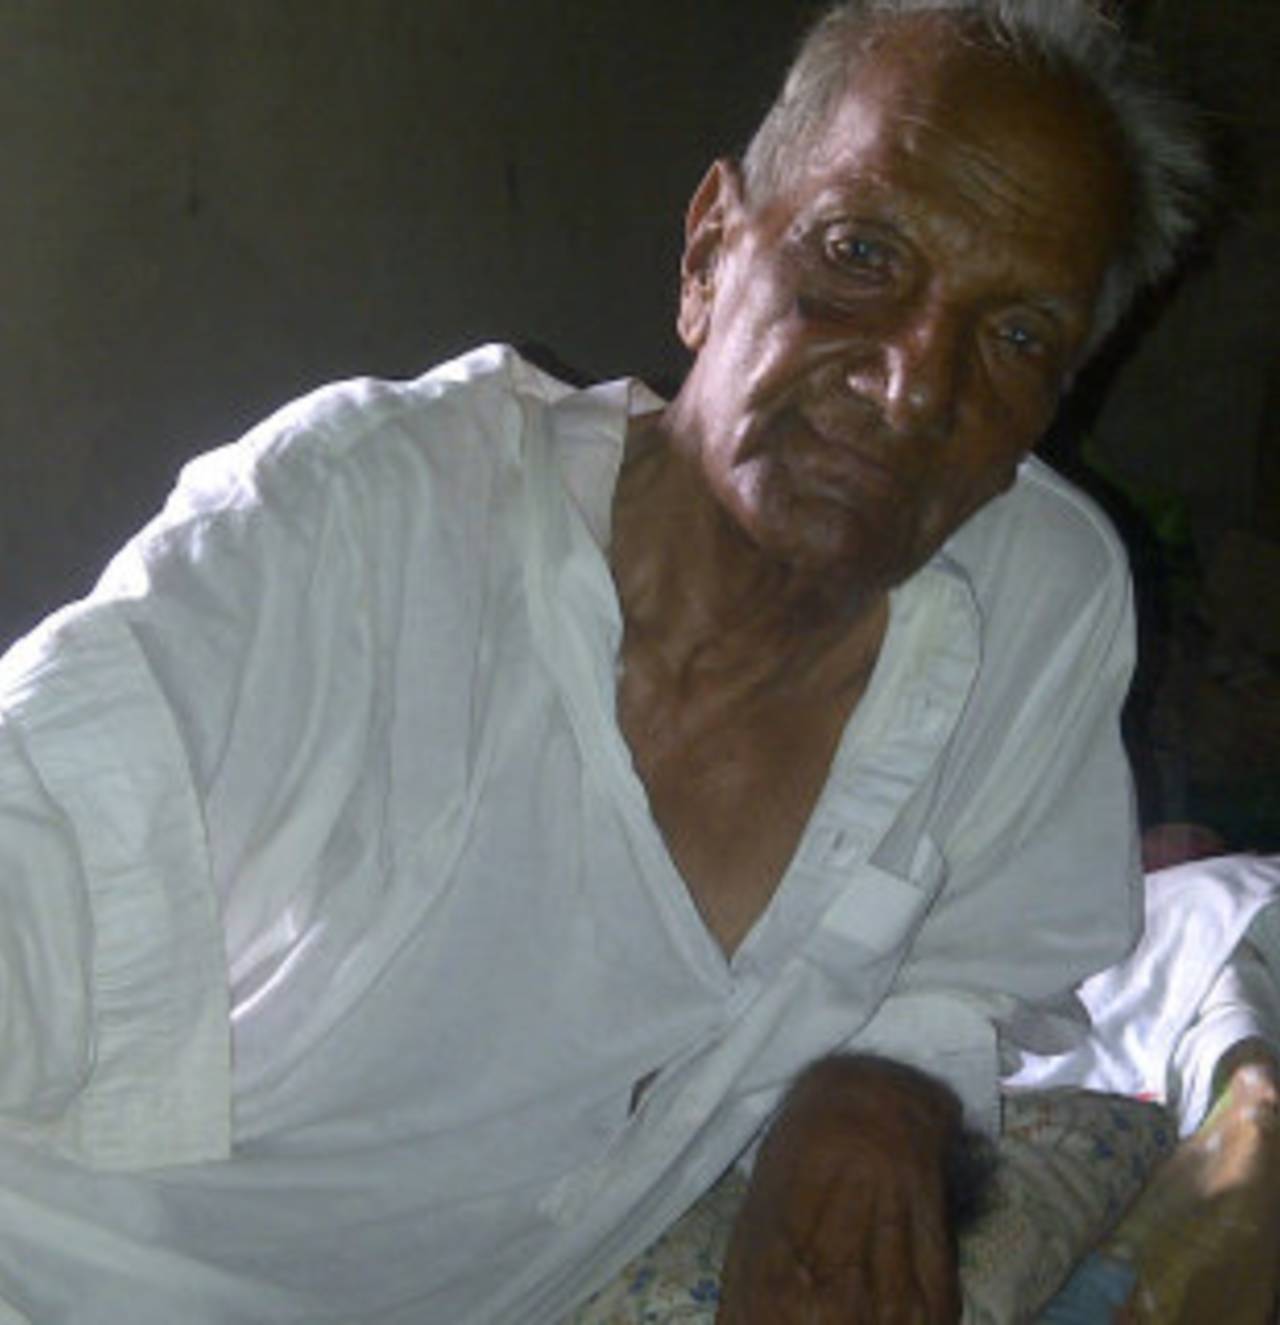 The 85-year-old Israr Ali, Pakistan's oldest living Test cricketer, at his home in Okara, Pakistan, July 2012